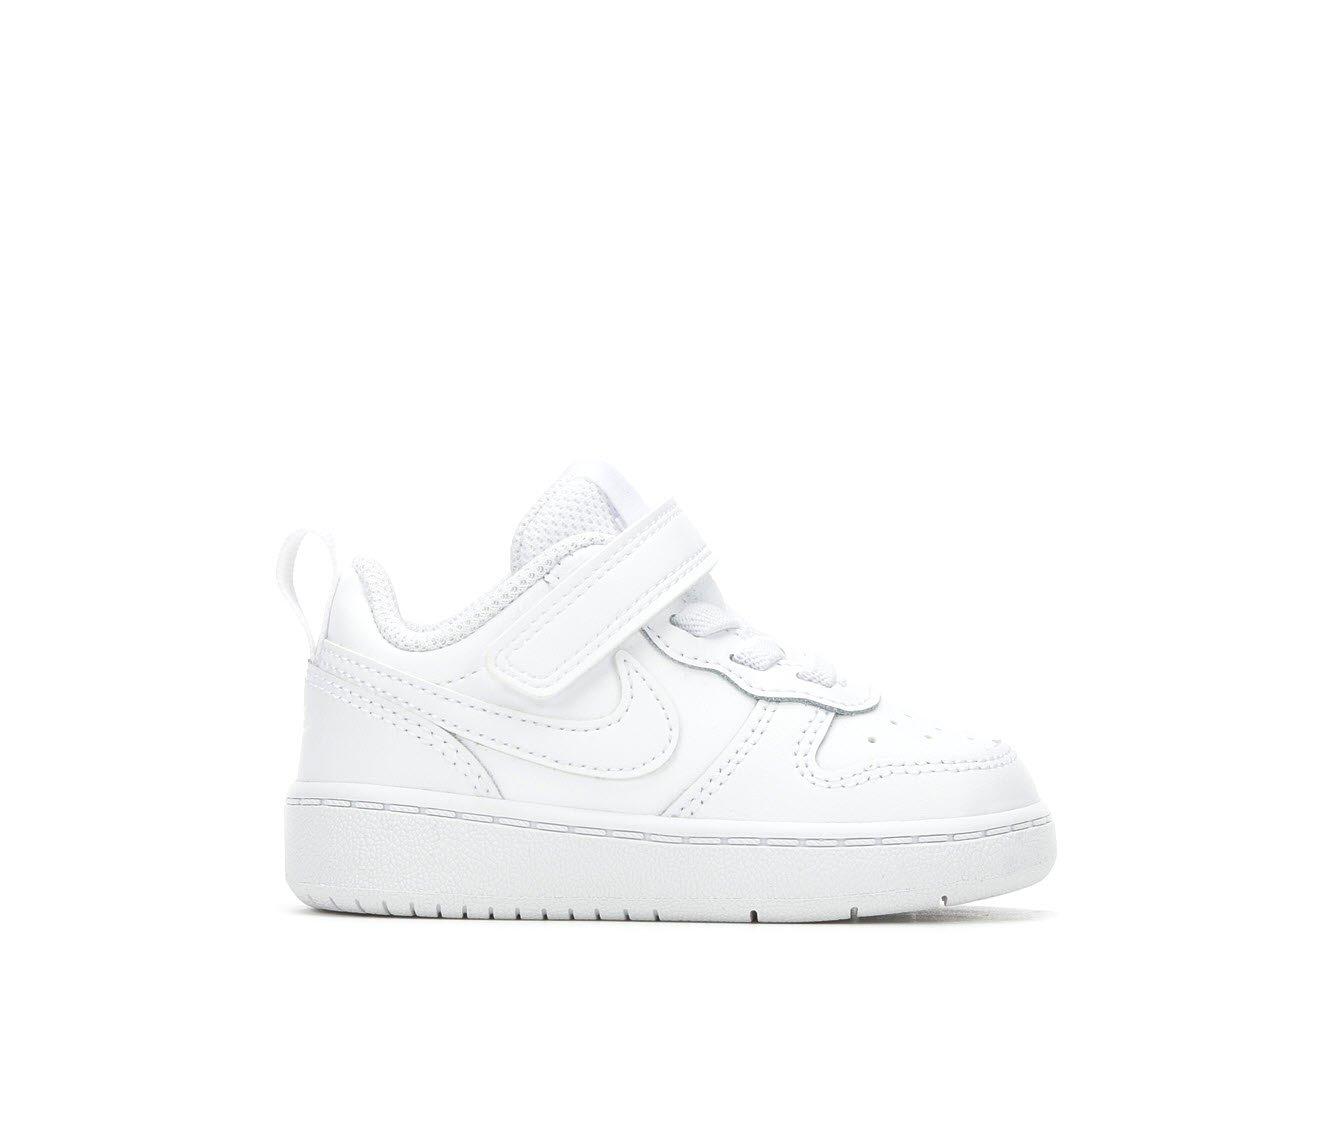 Boys' Nike Infant & Toddler Low 2 Sneakers